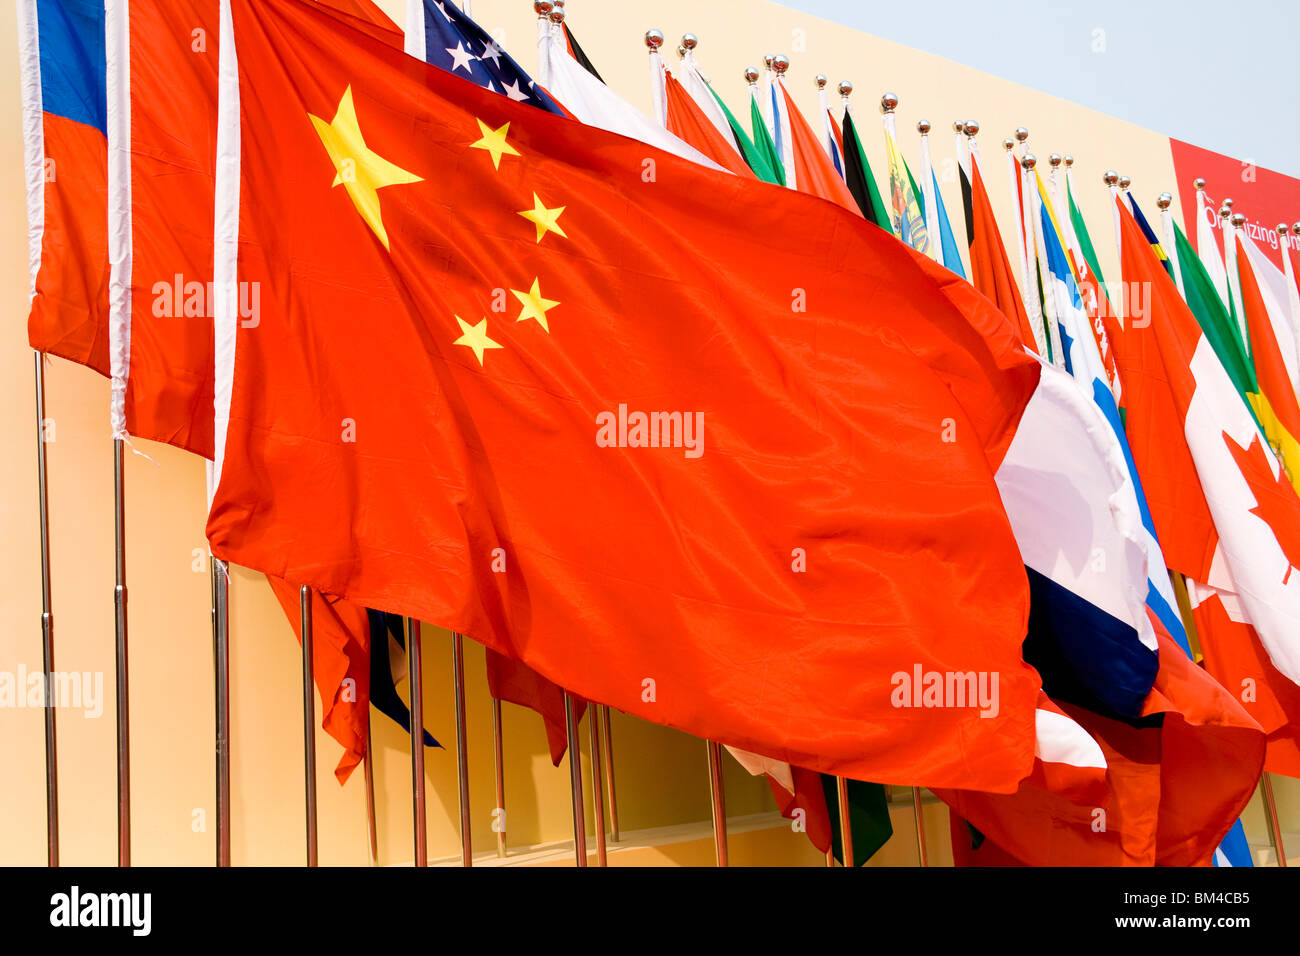 Colorful flags of a variety of nations Stock Photo